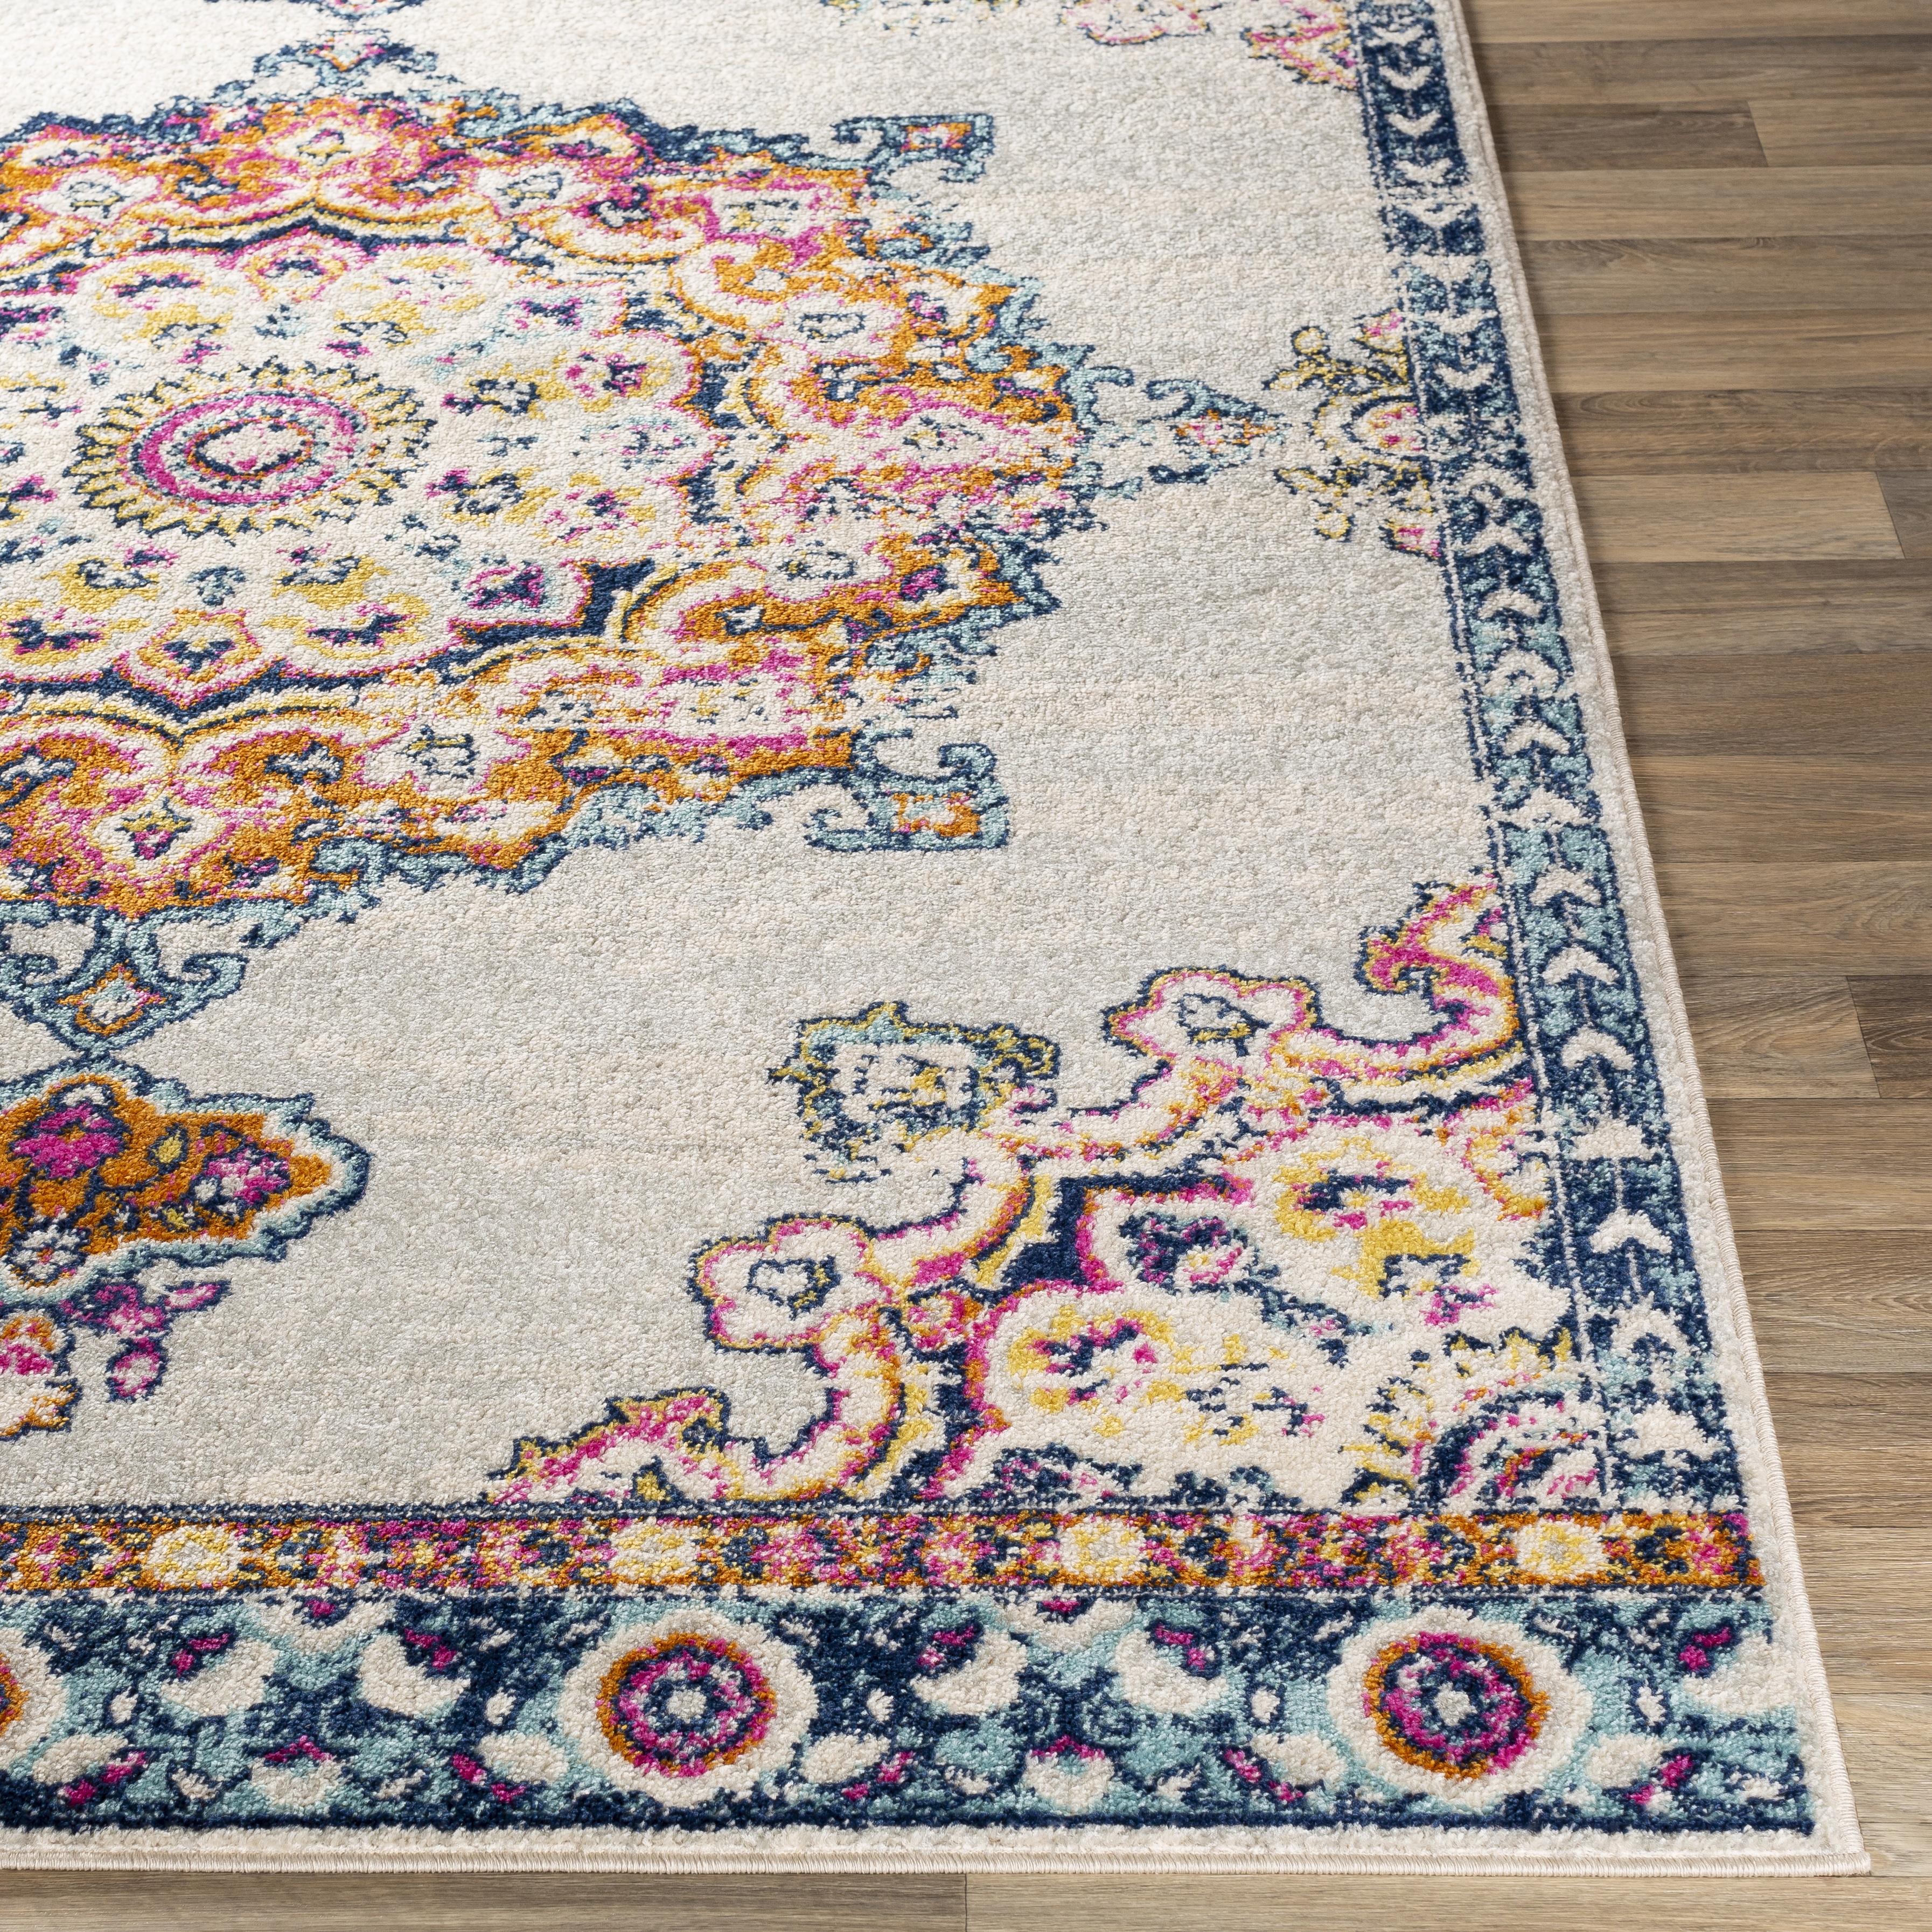 Chester Rug, 9' x 12' - Image 2